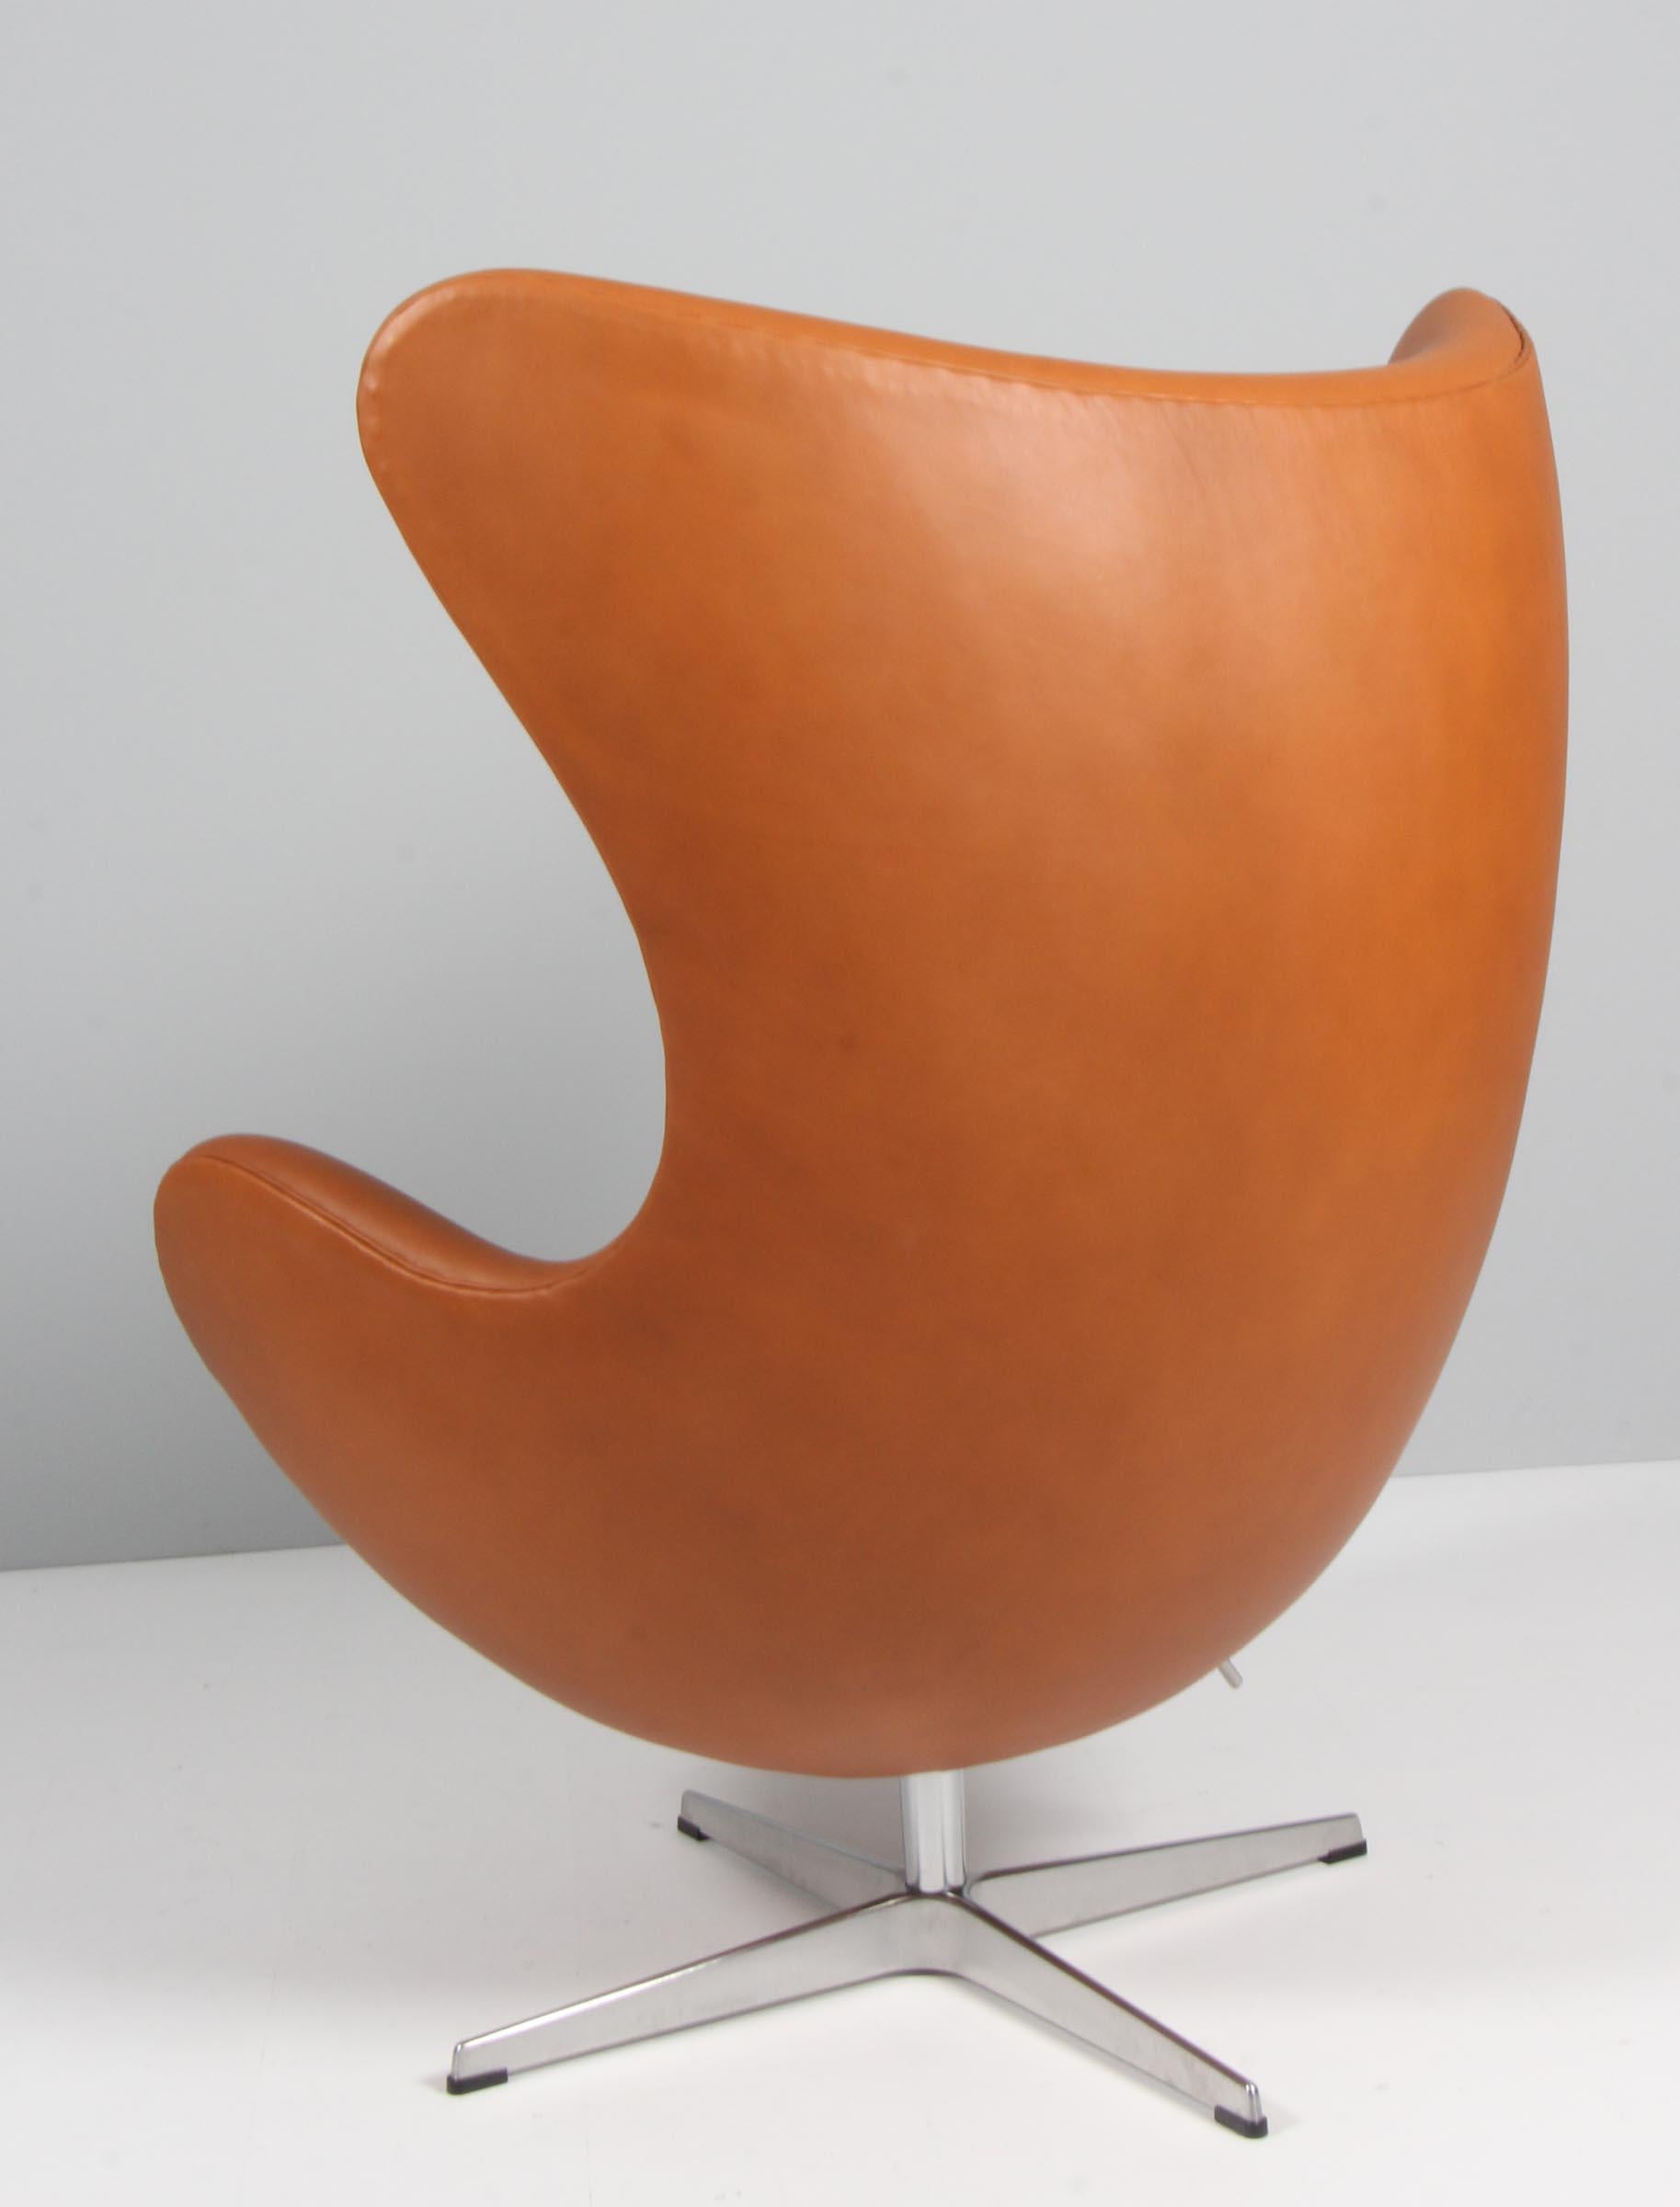 Arne Jacobsen Egg Chair In Excellent Condition For Sale In Esbjerg, DK